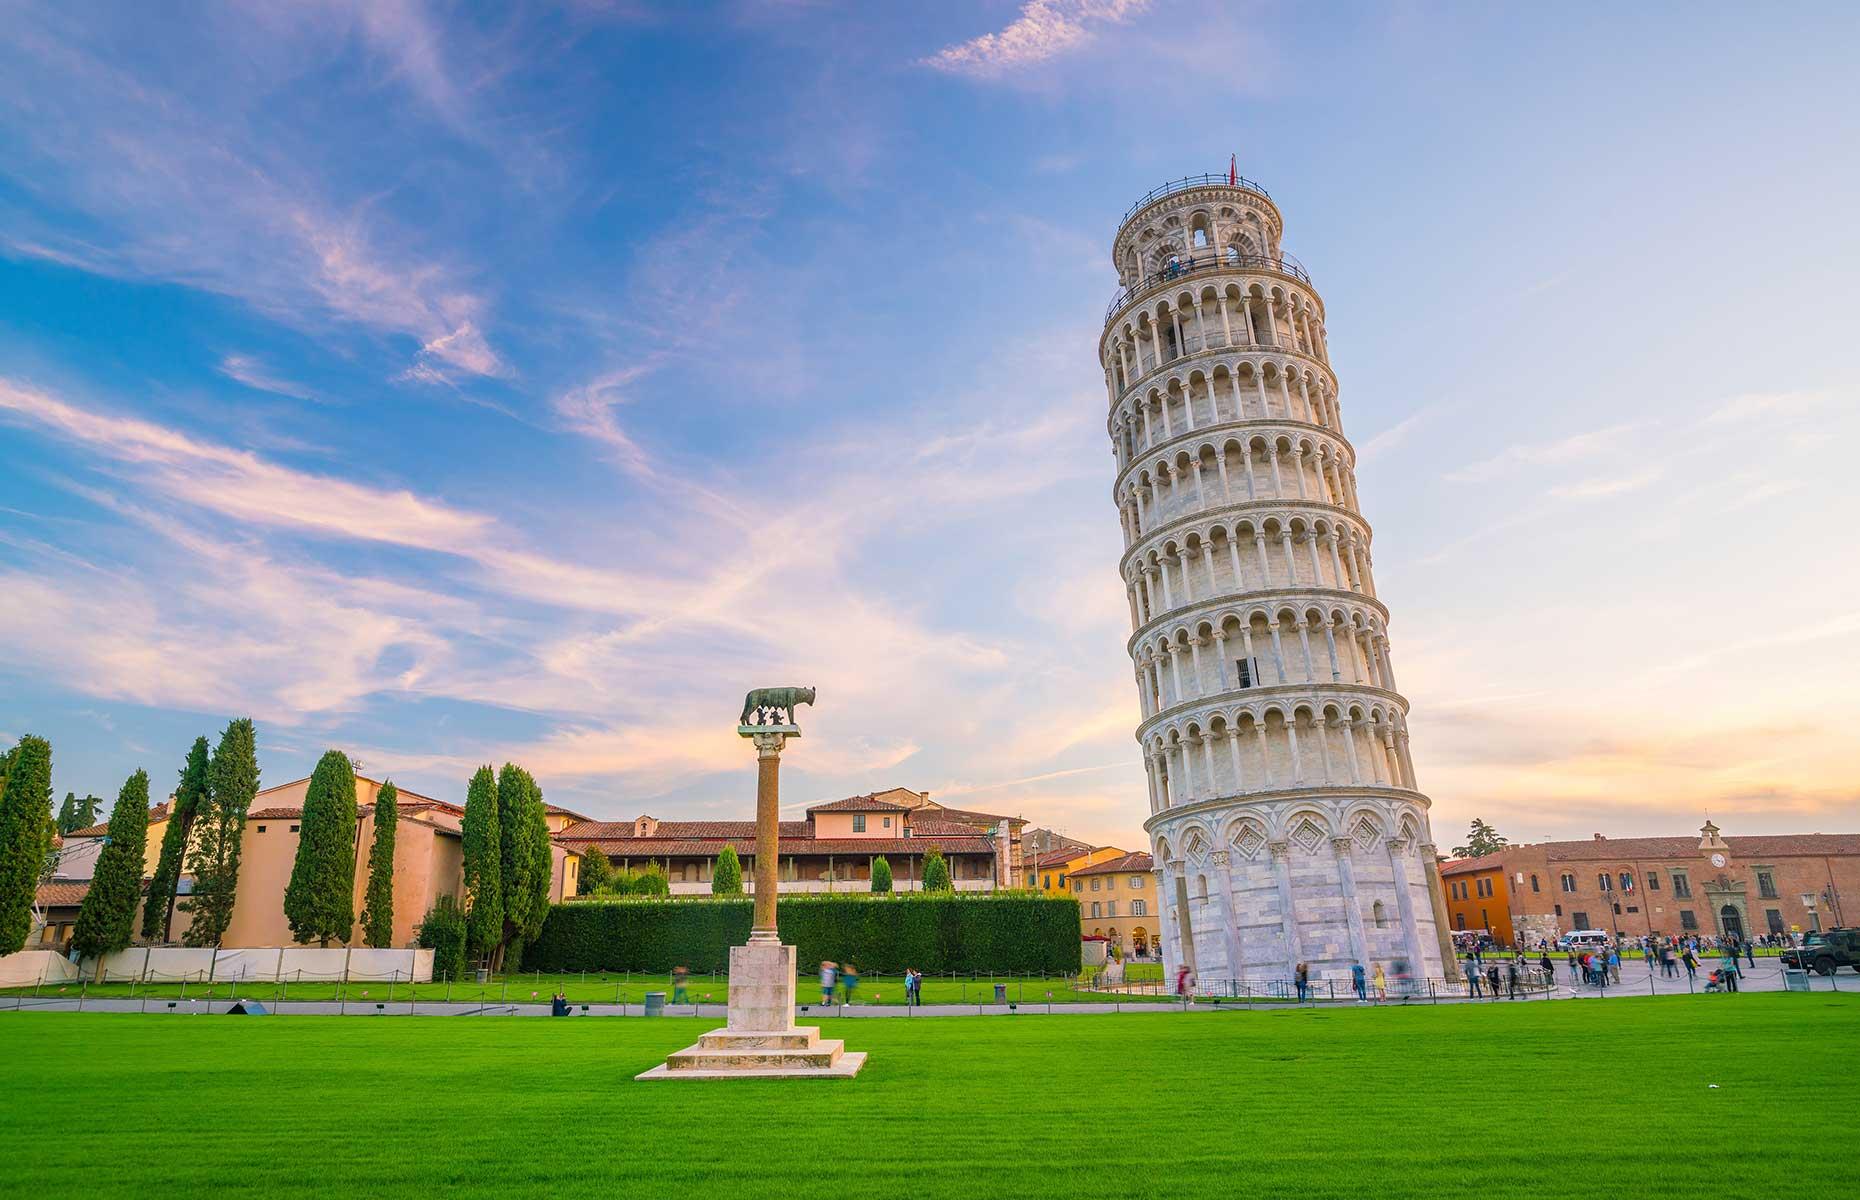 <p>A mind-boggling feat of medieval architecture, the Leaning Tower of Pisa is one of Italy's most-loved attractions. But <a href="https://edition.cnn.com/travel/article/tourist-drone-incidents-rome-pisa/index.html">this Romanian tourist fancied a different angle</a> of the tower and flew his drone over nearby Piazza dei Miracoli. Not realizing he needed a special license and authorization from the prefecture and the police, he was stopped before any damage was caused. In a similar case, another drone did actually hit the centuries-old landmark but thankfully neither instance caused any major damage.</p>  <p><a href="https://www.loveexploring.com/galleries/151611/surprising-sights-you-wont-believe-are-in-europe?page=1"><strong>Bored of the main tourist attractions? Discover the surprising sights you won't believe are in Europe</strong></a></p>